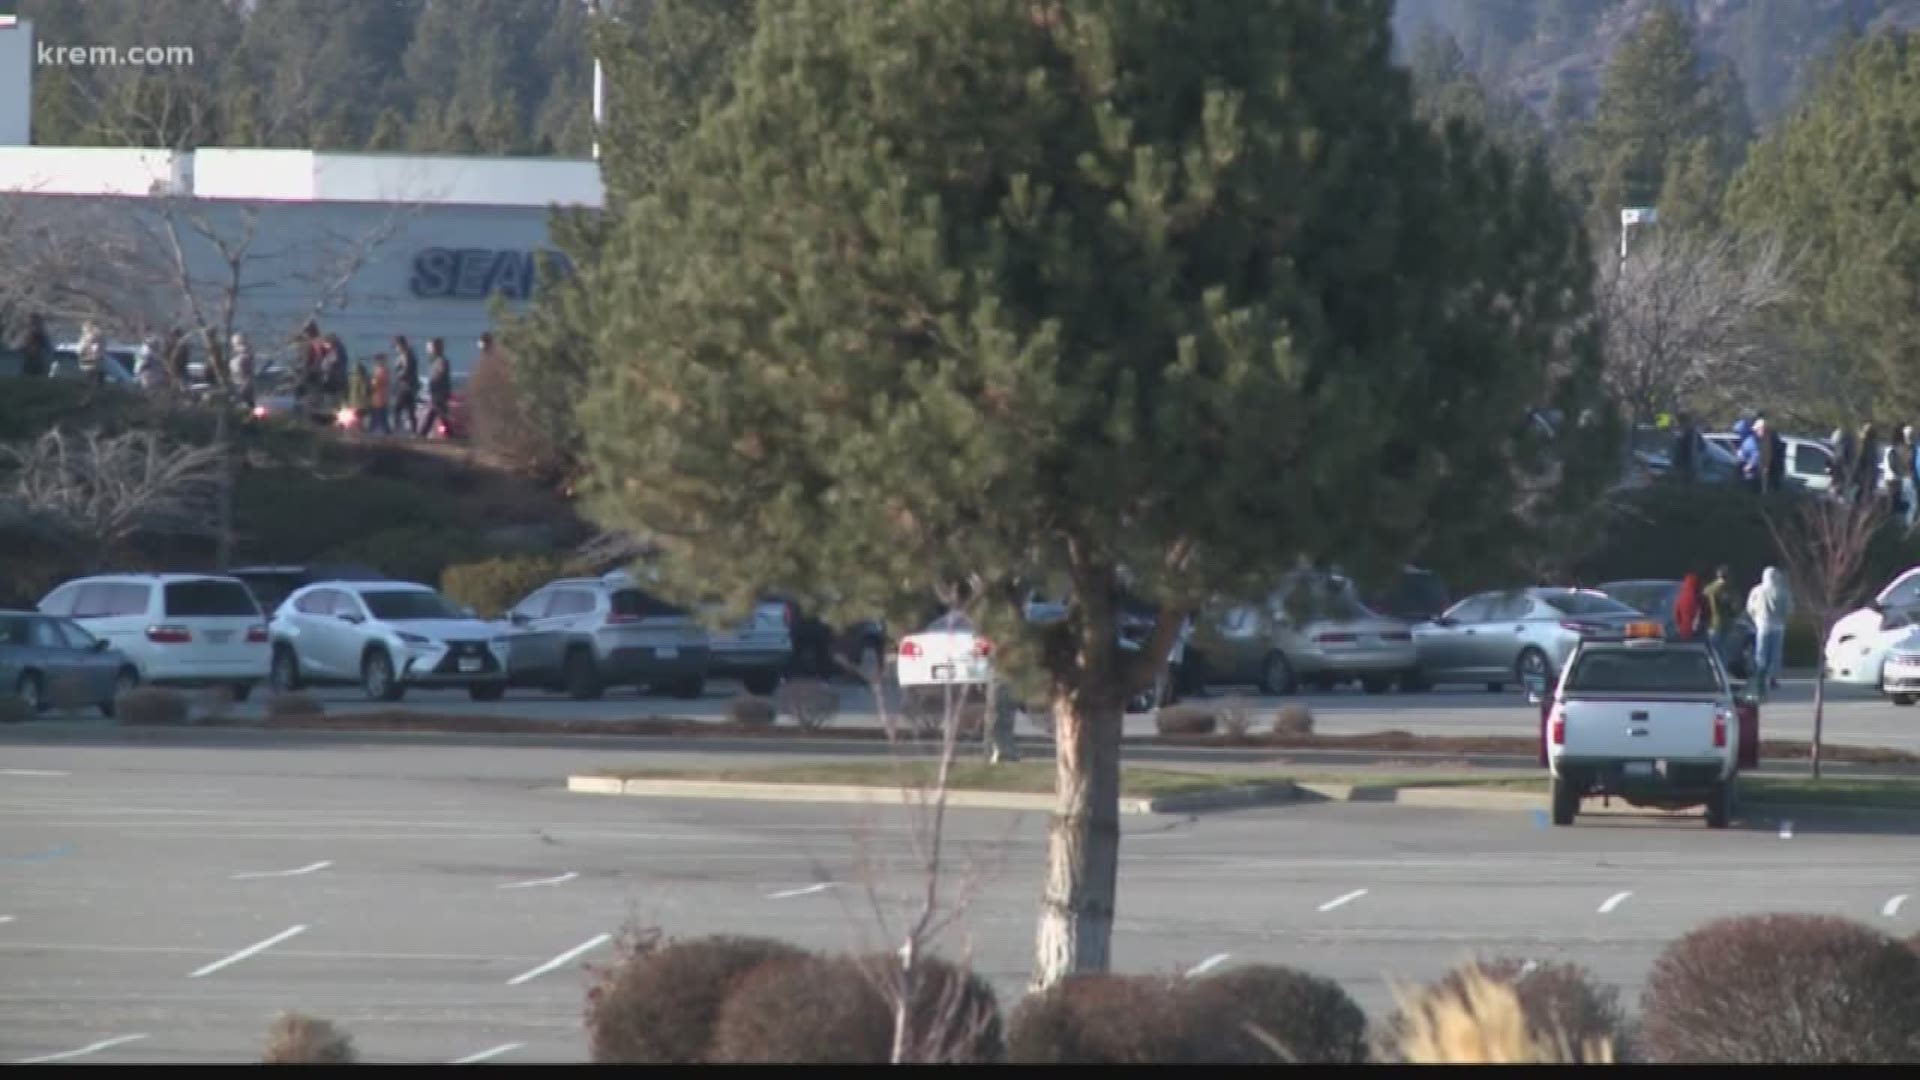 Shopper started lining for Black Friday deals starting as early as 2 p.m. on Thursday. KREM's Taylor Viydo asked some of the shoppers what brought them out so early.